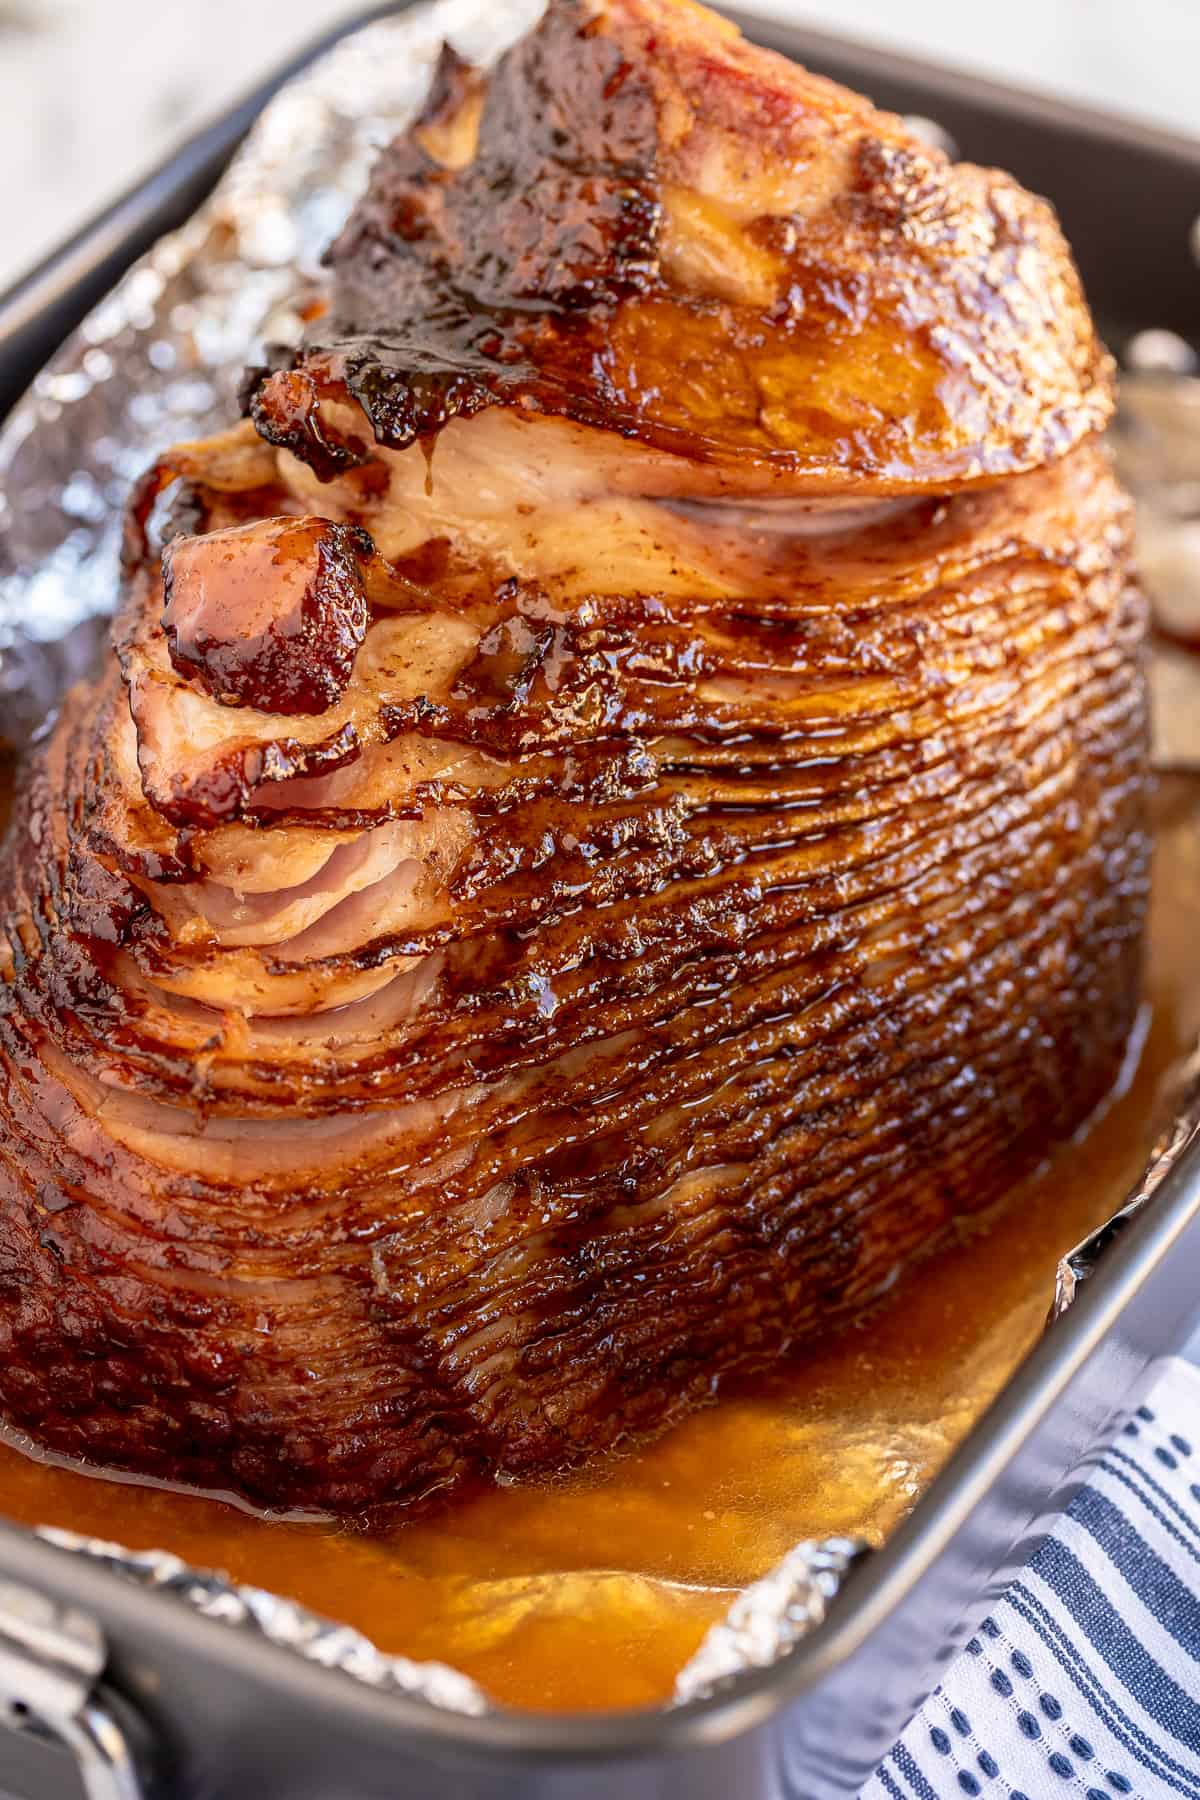 Thinly sliced maple glazed spiral ham on a baking tray.